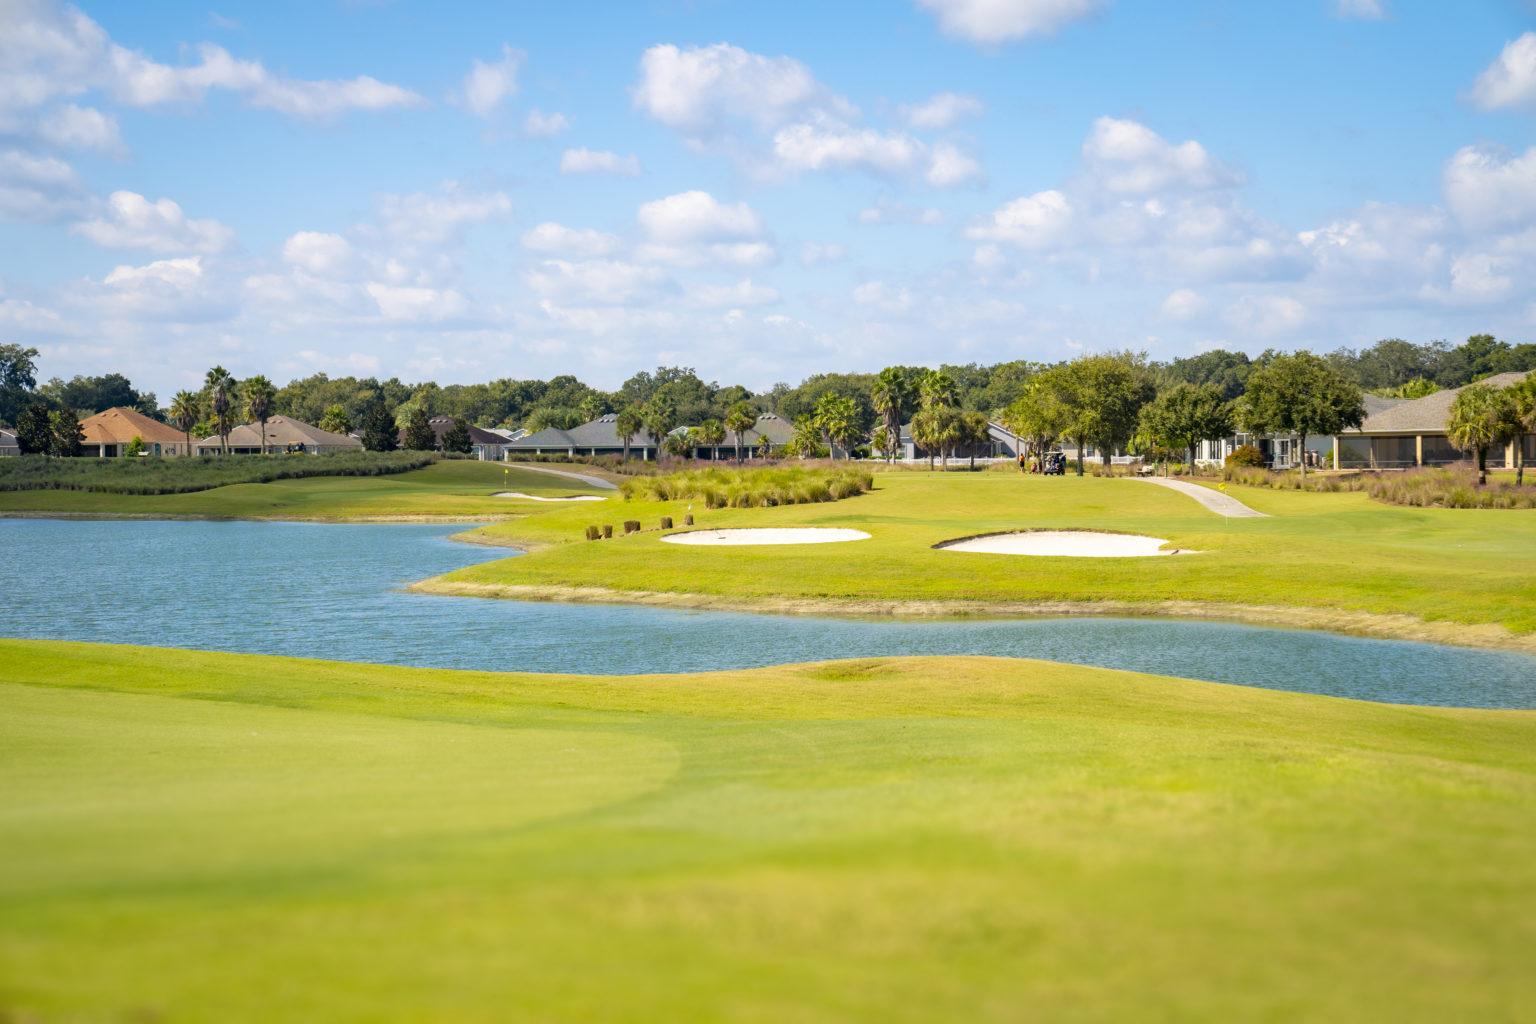 There is a lake on the golf course, as well as many houses - Tarpon Boil Executive Golf Course